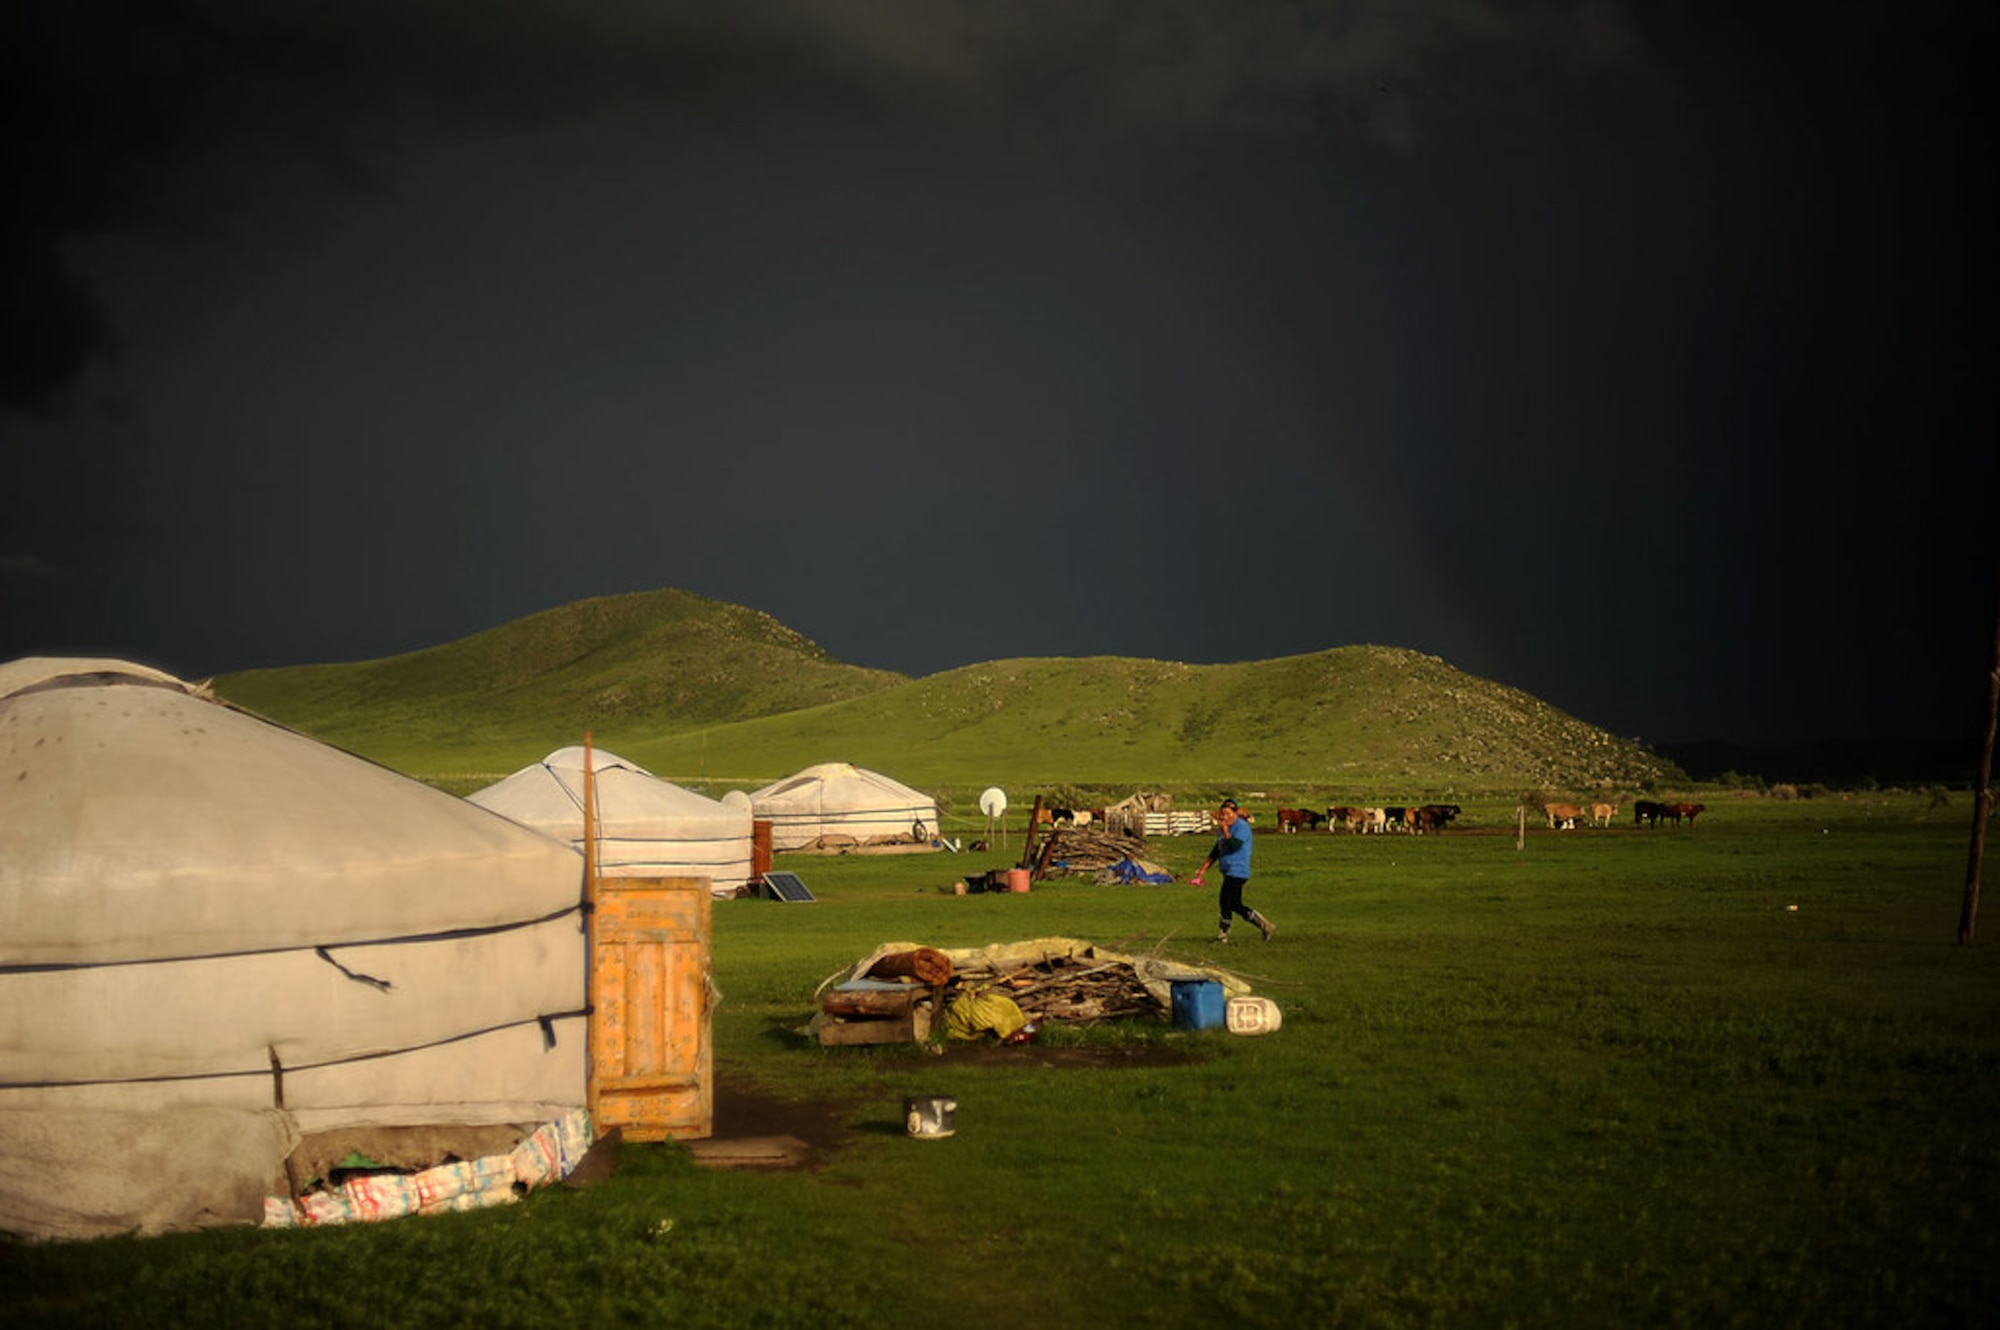 Herders live in a traditional Mongolian dwelling called a Ger. It is suited for the harsh terrain and lifestyle the herders live. The Ger is a round felt tent covered in durable, waterproof, white canvas and is designed to be able to pack up and move. Its round shape keeps the Ger resilient to Mongolia 's ferocious winds, while its felt is rapidly drying material for when it rains or snow melts. In Ulaanbaatar and towns across the country, people are setting into large, faceless apartment blocks. Ger districts usually occupy poor quality land on the outskirts of town. But in summer, urban Mongolians head to the outskirts where they spend as much time as possible in small wooden houses or gers where they can enjoy the beautiful Mongolian summers away from the uncomfortably hot urban apartments. (U.S. Air Force photo/Master Sgt. Jeremy T. Lock)